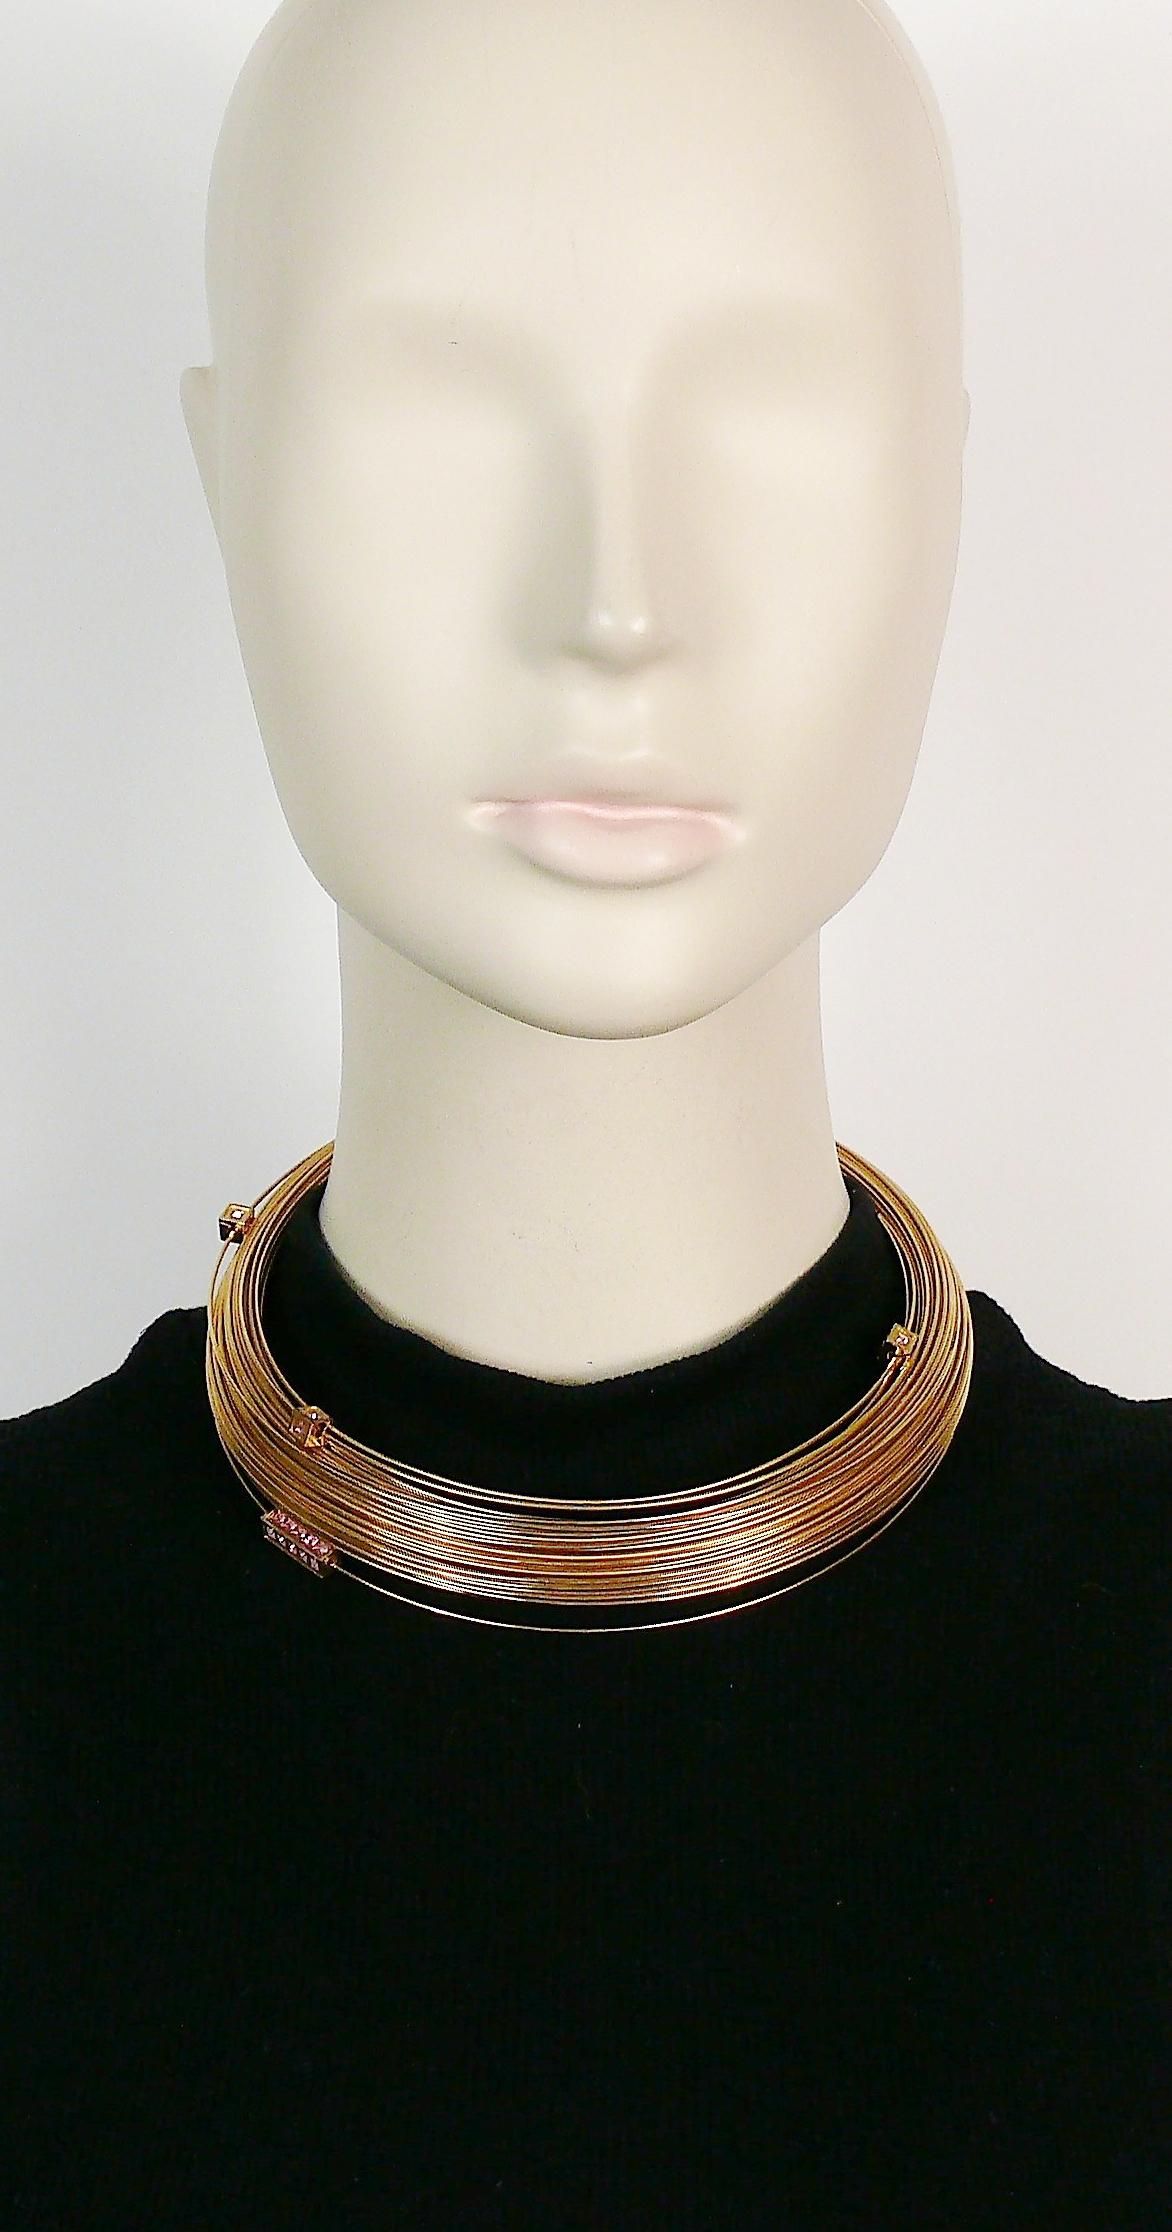 THIERRY MUGLER vintage gold toned choker necklace made of bundled wires and featuring mobile elements embellished with pink crystals.

Embossed TM.

Indicative measurements : circumference approx. 37.30 cm (14.69 inches).
Adjustable from small to